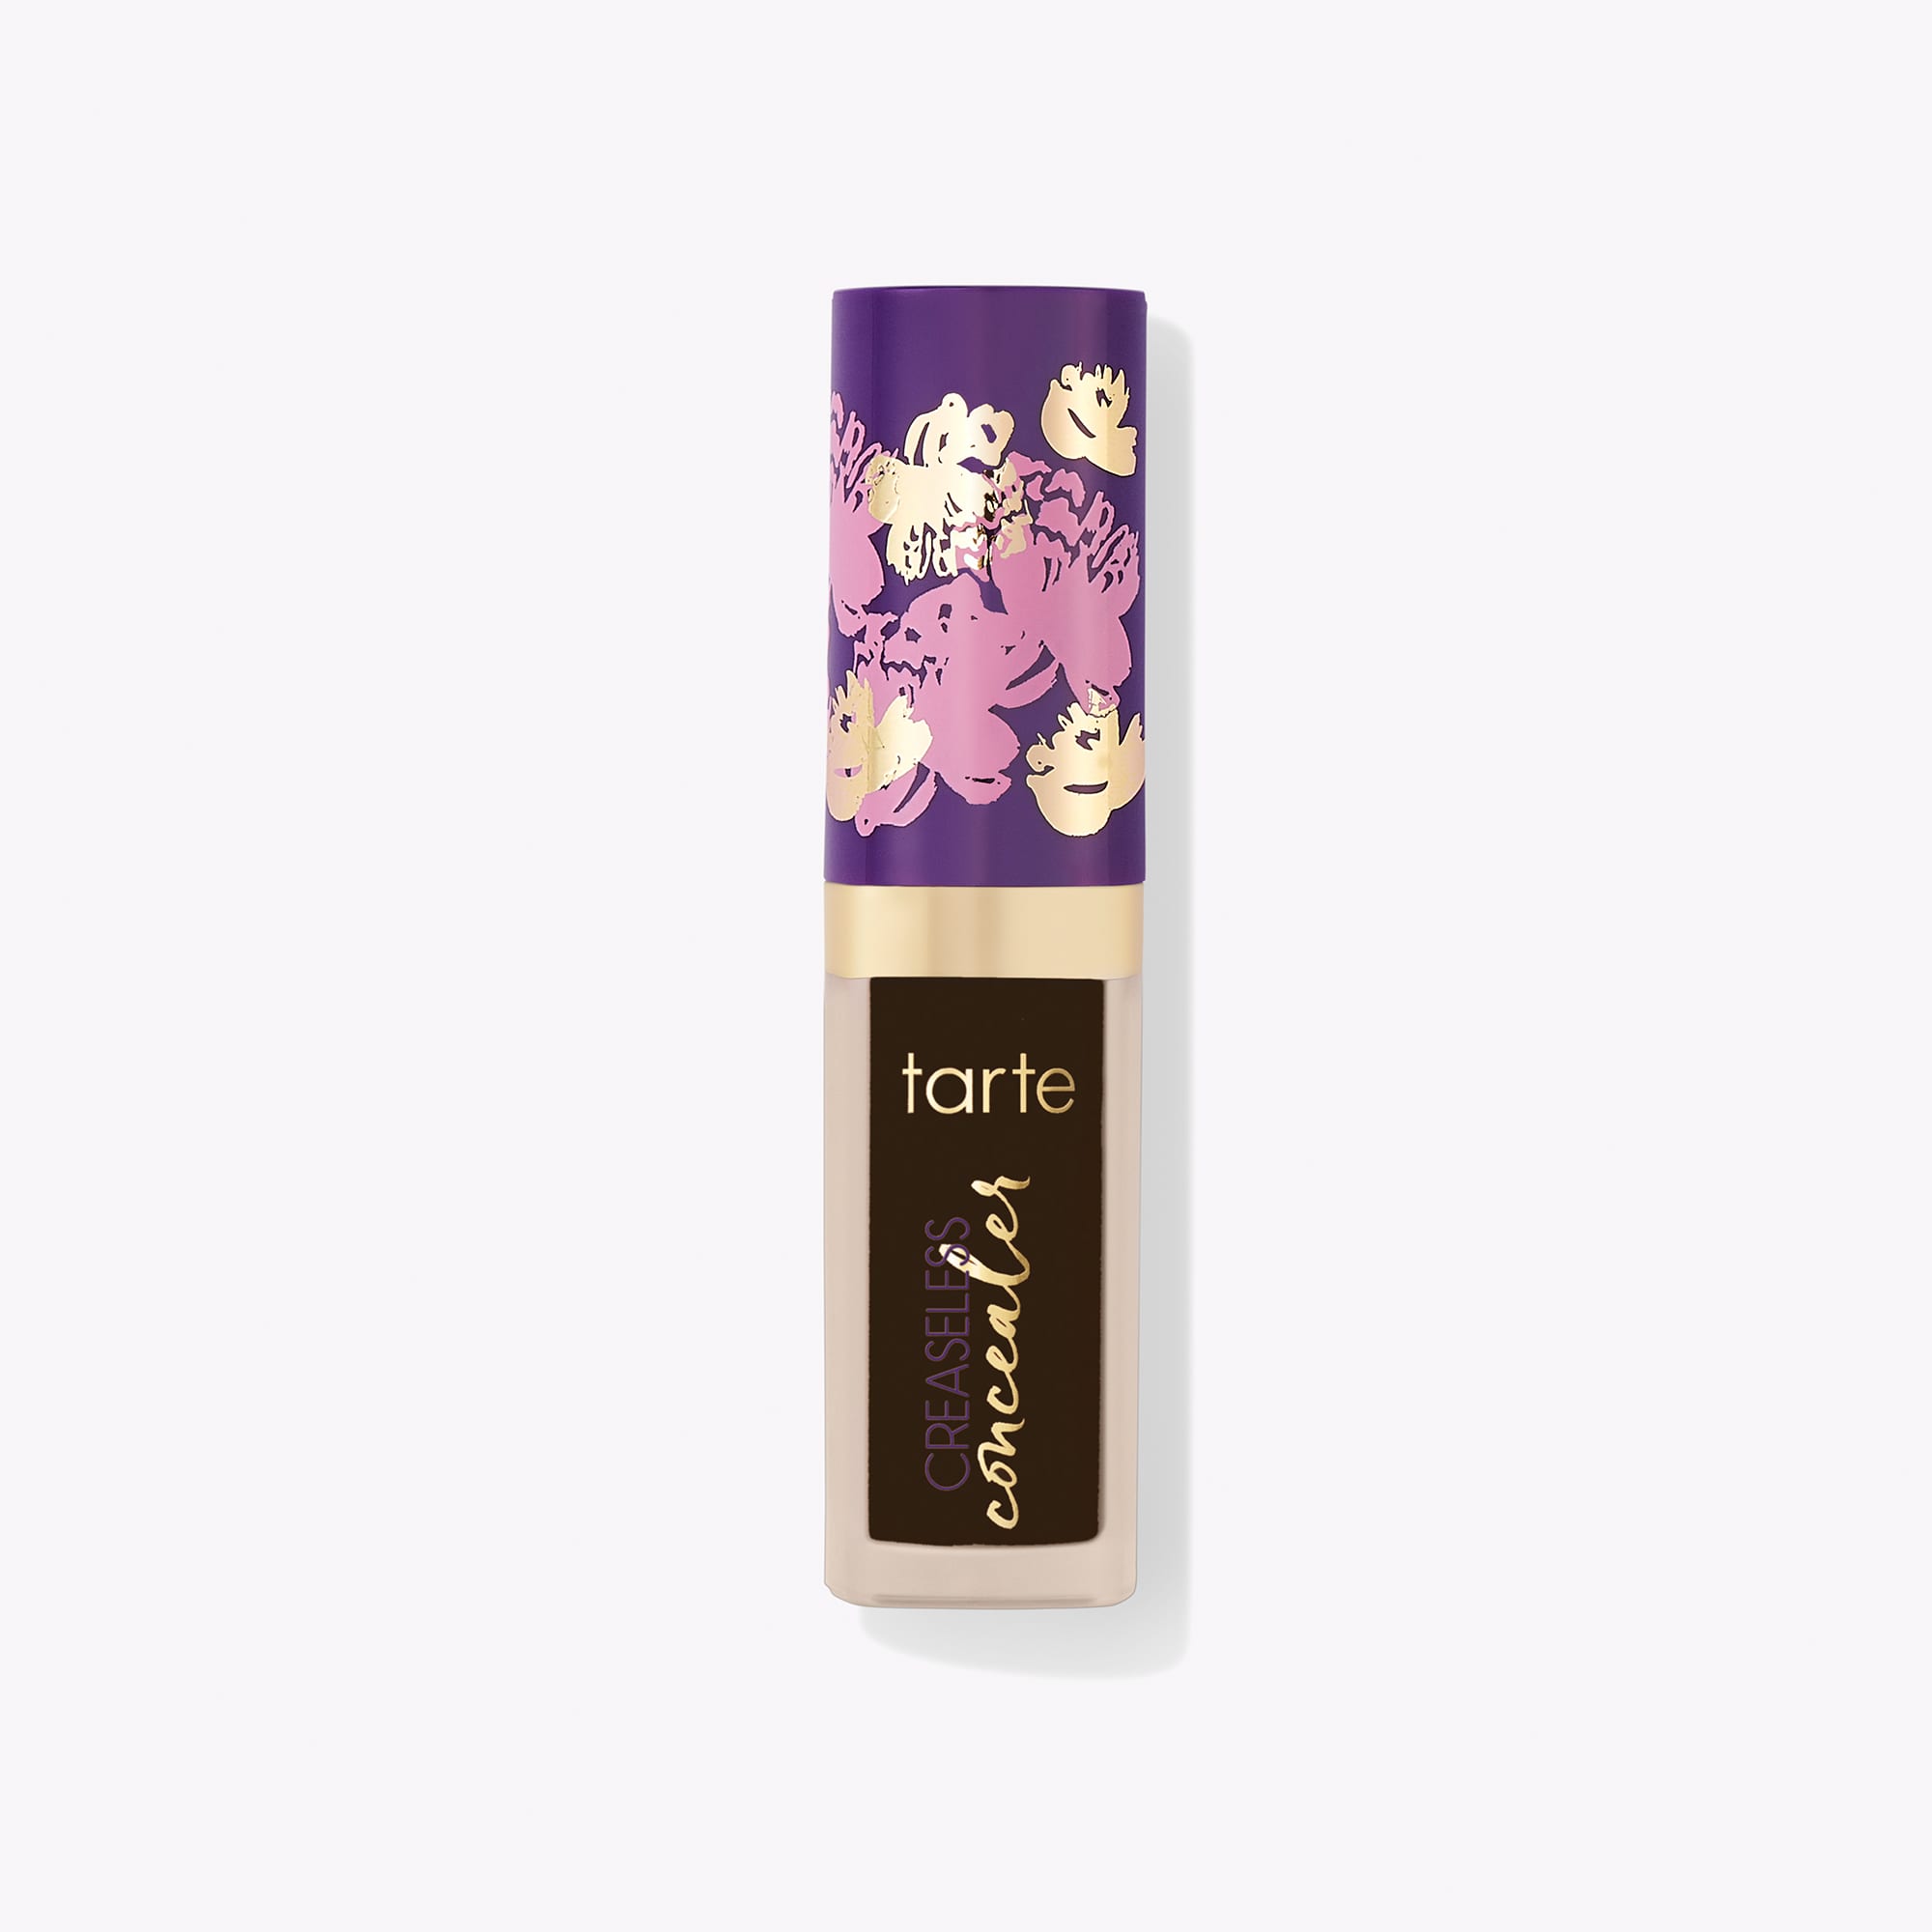 Tarte Cosmetics Travel-size Creaseless Concealerâ?¢ In Neutral